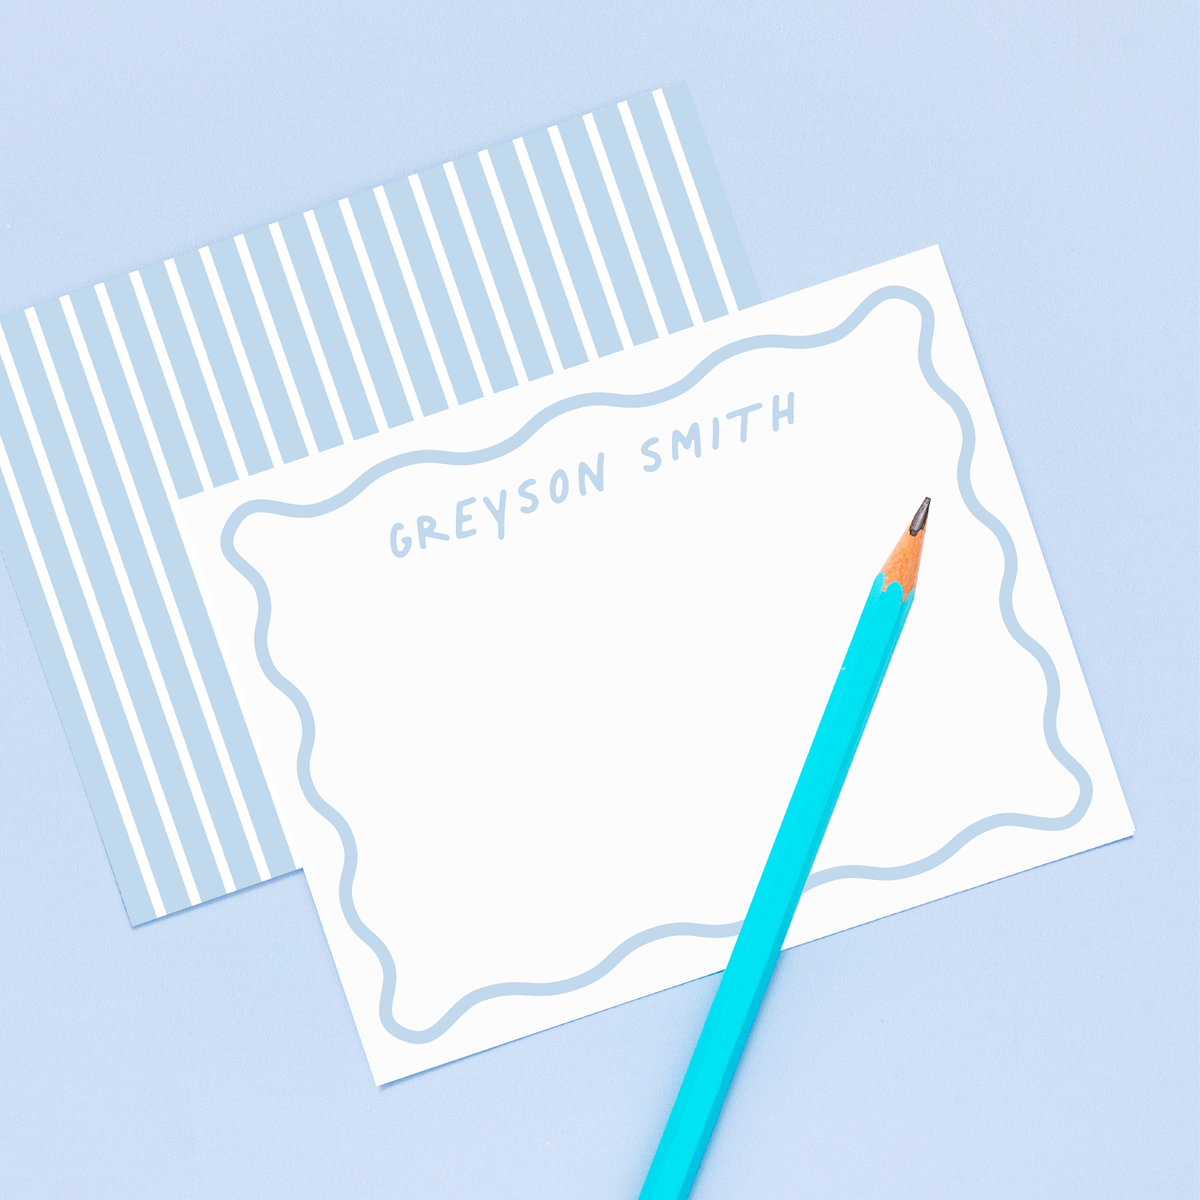 Oh Baby! Personalized Wavy Stationery